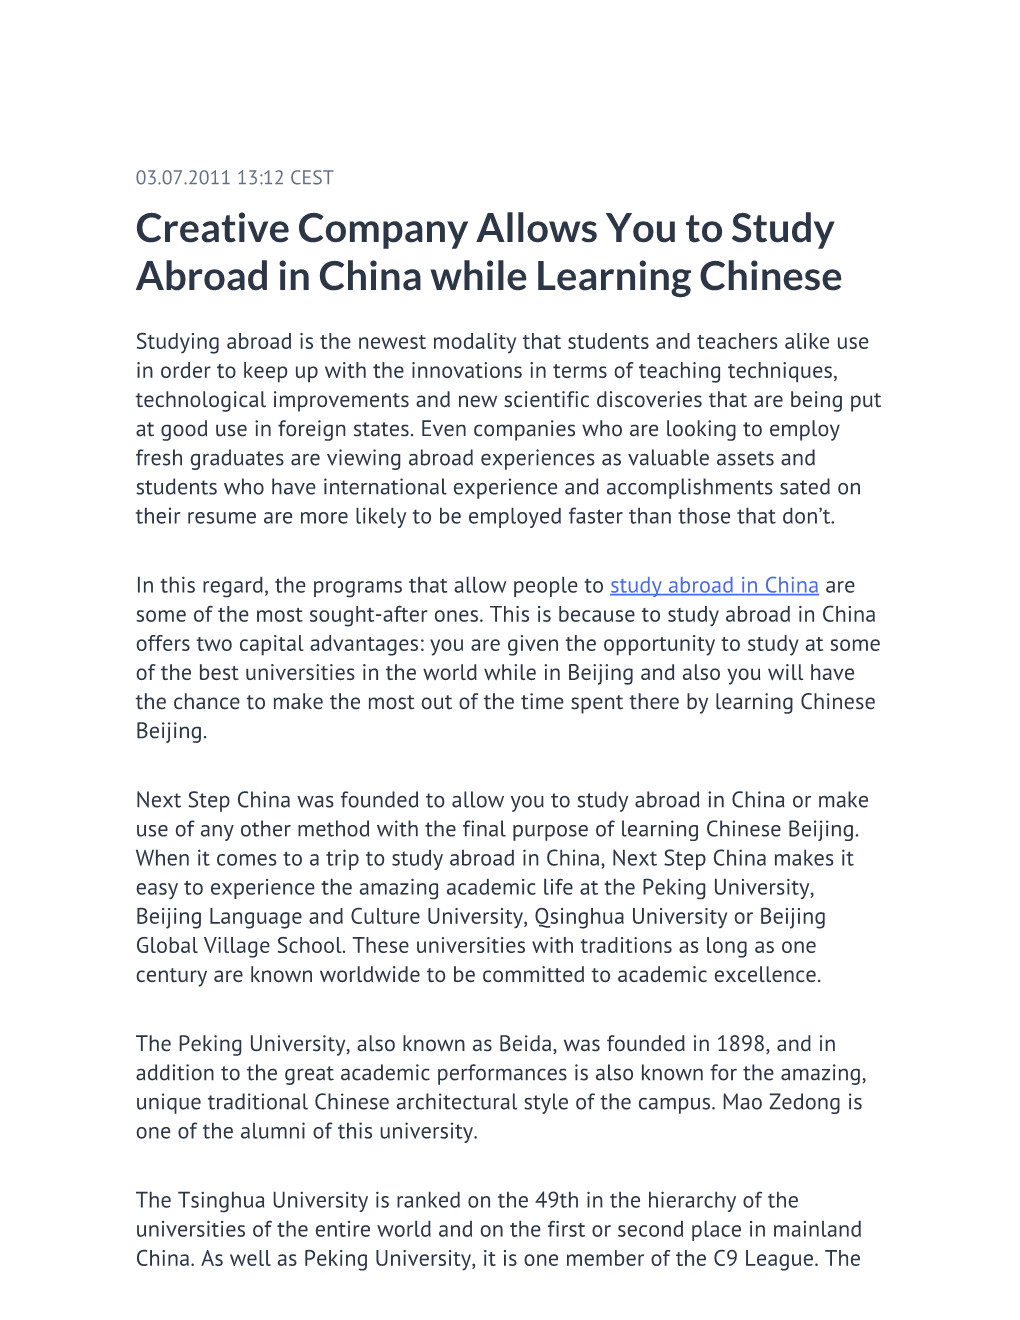 Creative Company Allows You to Study Abroad in China While Learning Chinese